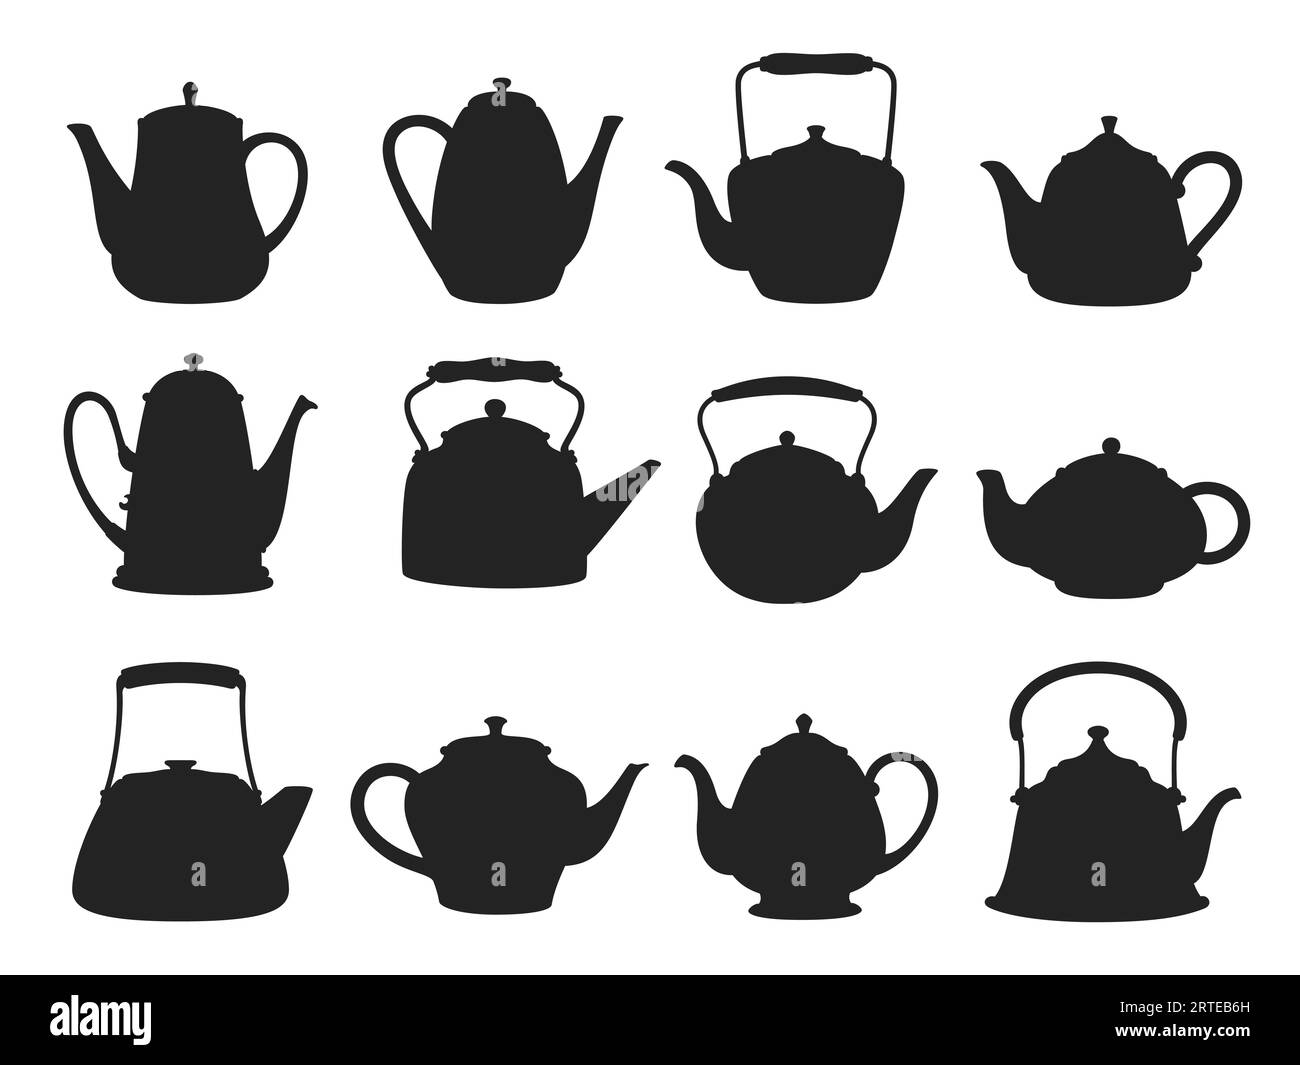 Ceramic teapot and kettle silhouettes. Vector kitchen crockery, black coffee or tea pots for hot drinks or beverages. Isolated set of retro tableware, handmade pottery or vintage household utensils Stock Vector